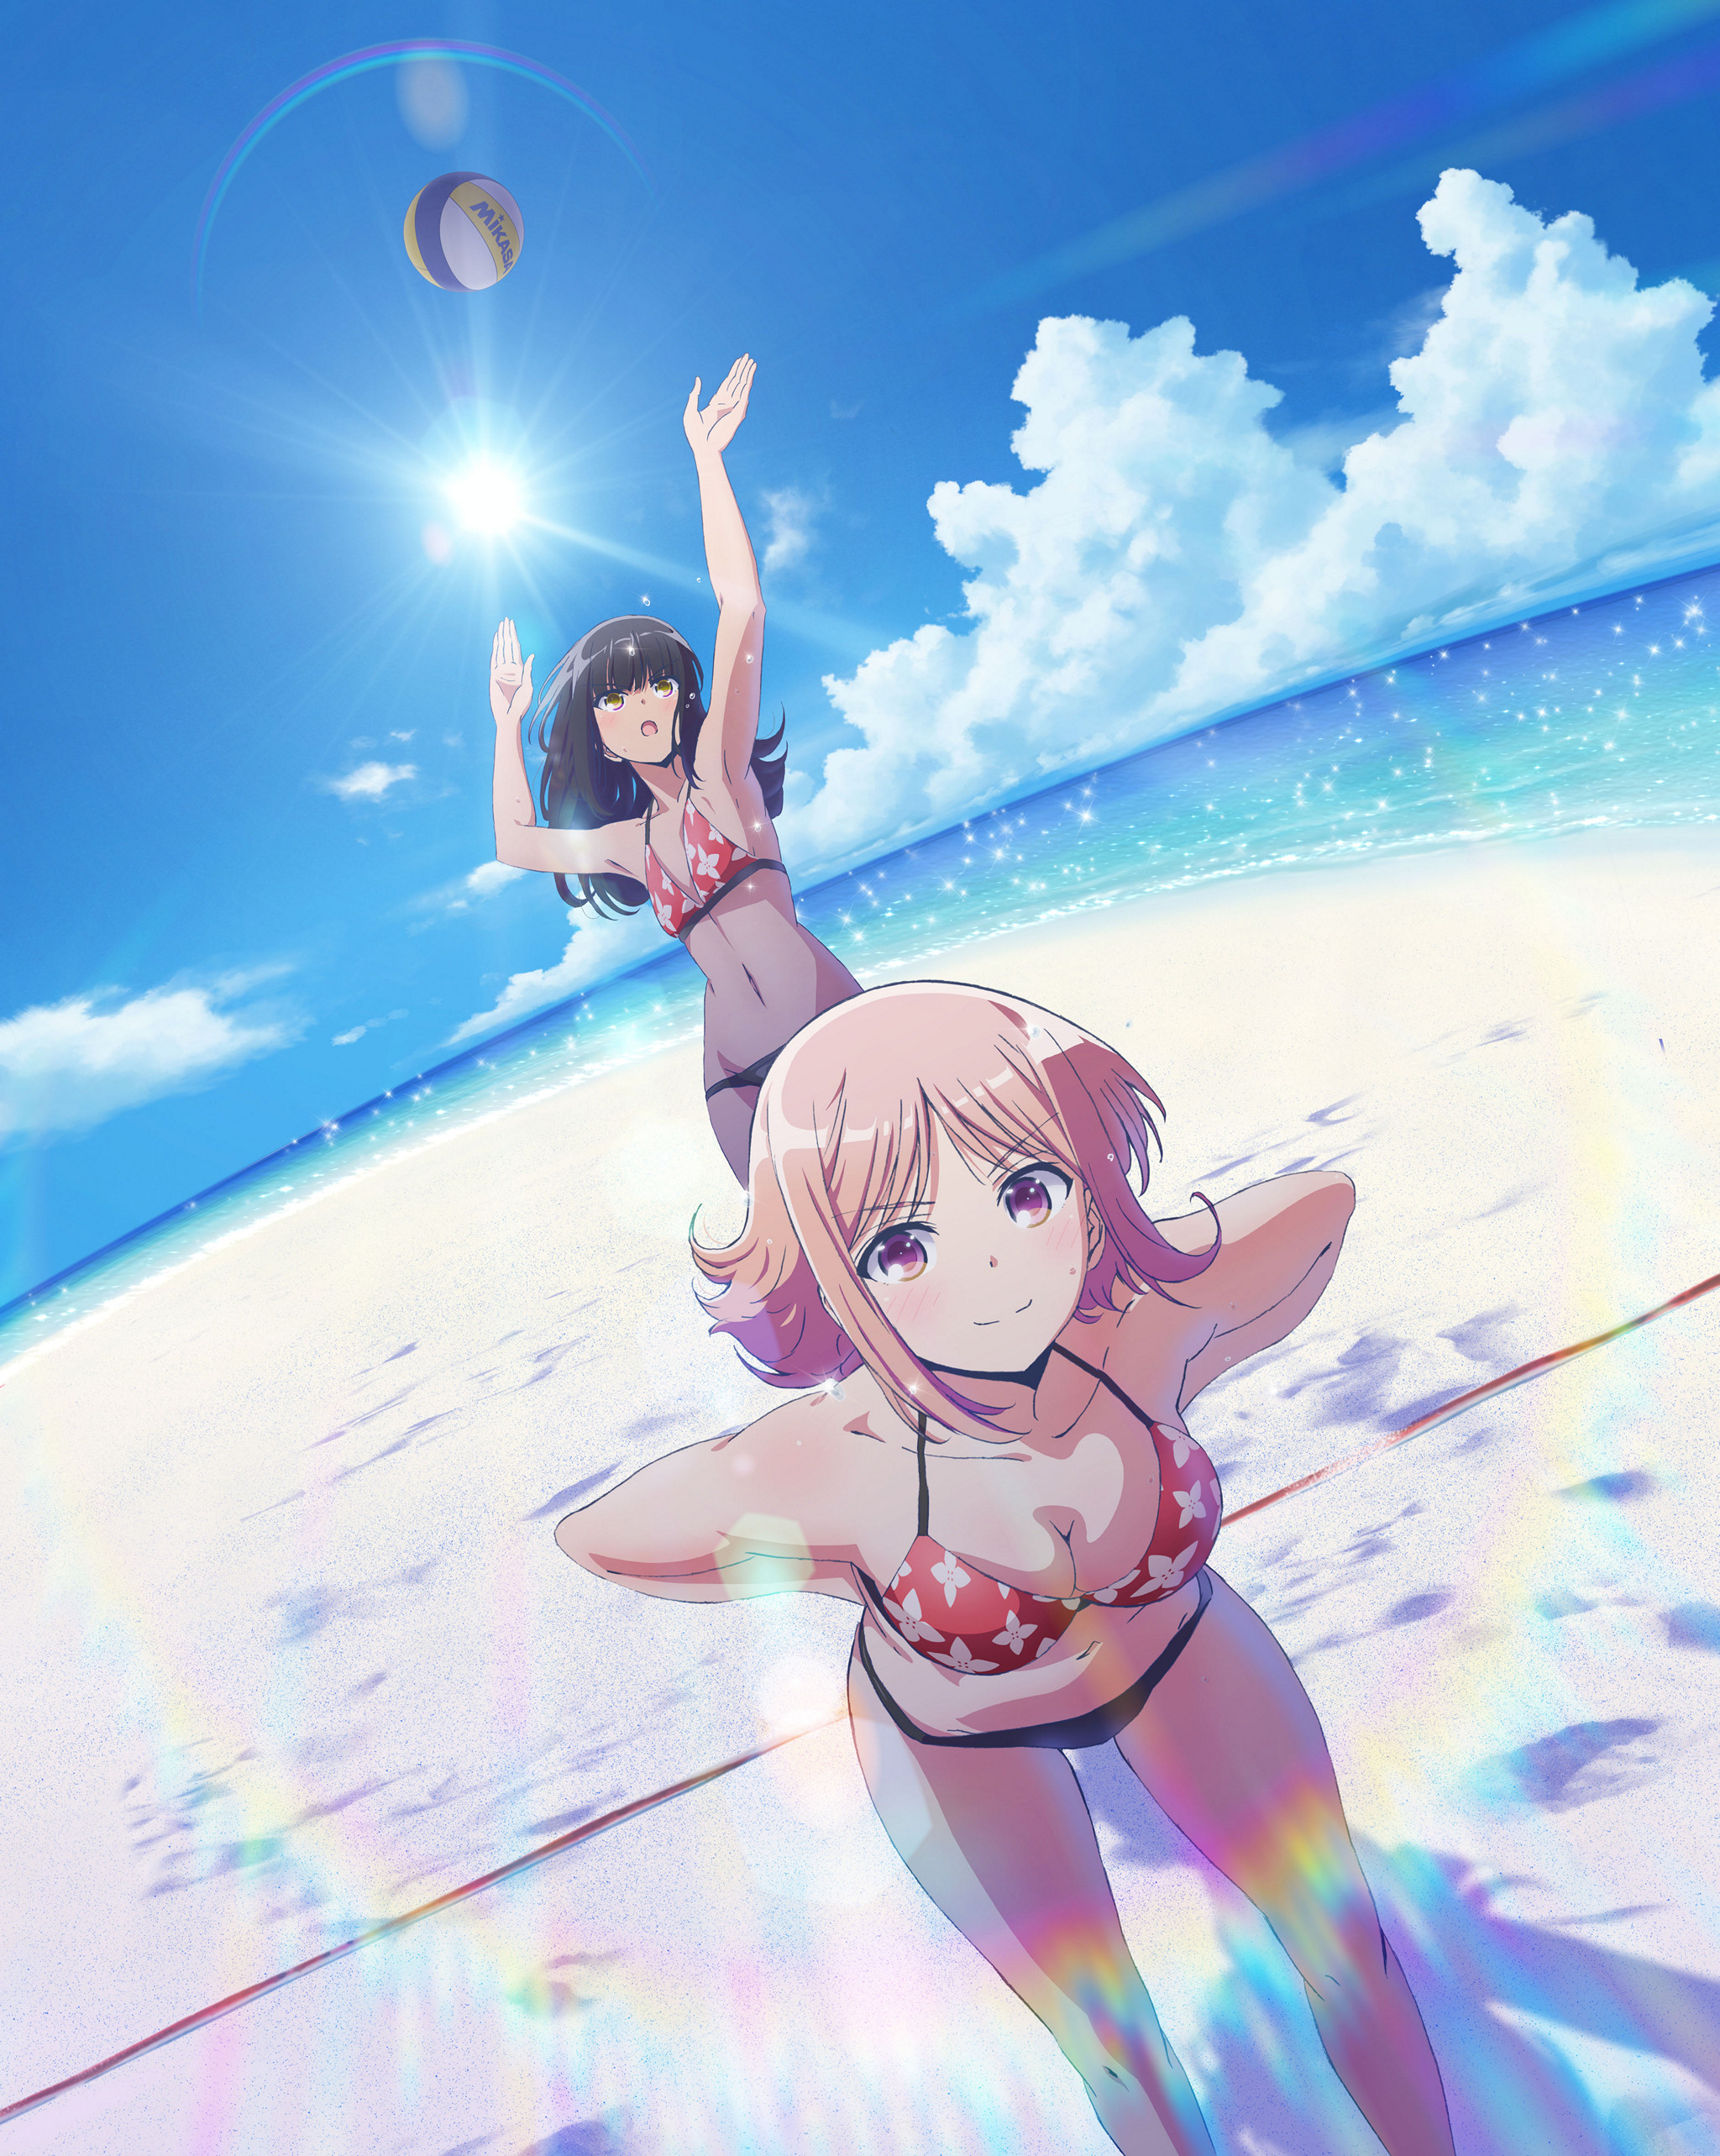 Crunchyroll on X: THAT'S IT! I CHALLENGE YOU TO A BEACH VOLLEYBALL MATCH!  (anime: Harukana Receive)  / X